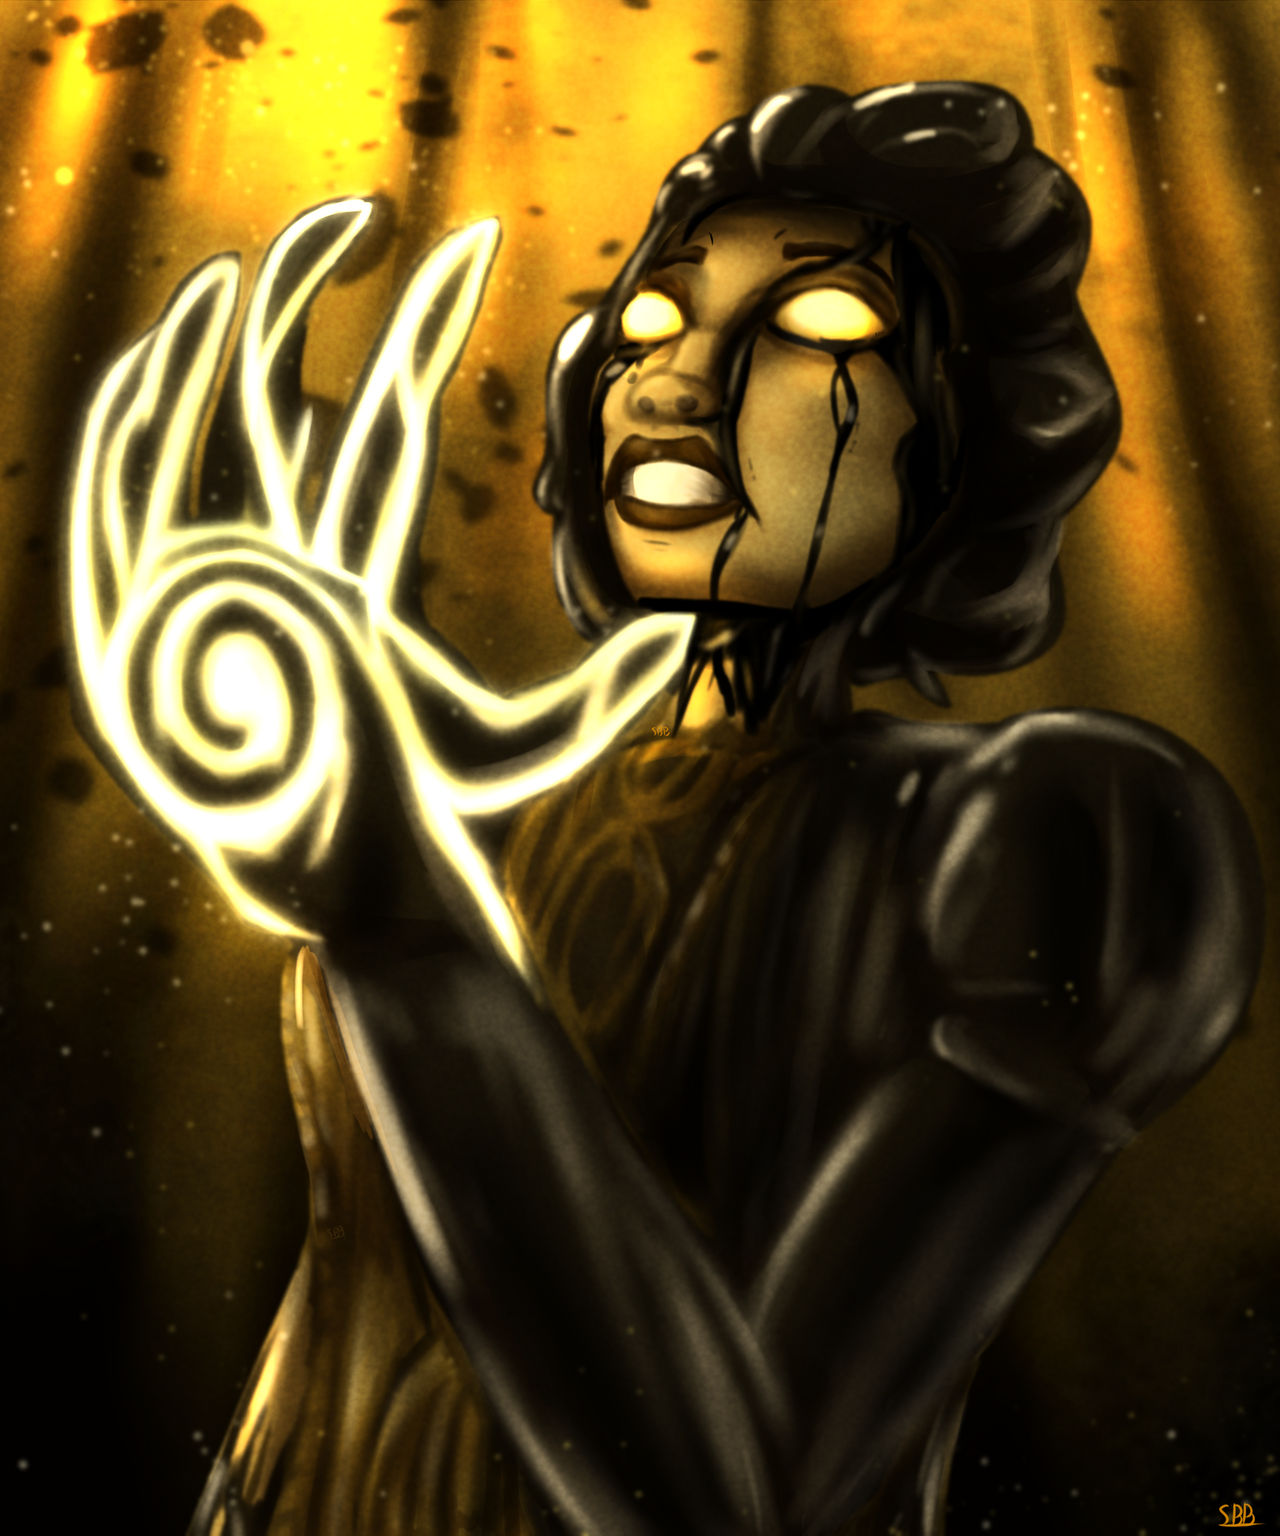 Bendy and the Dark Revival by fnafmangl on DeviantArt